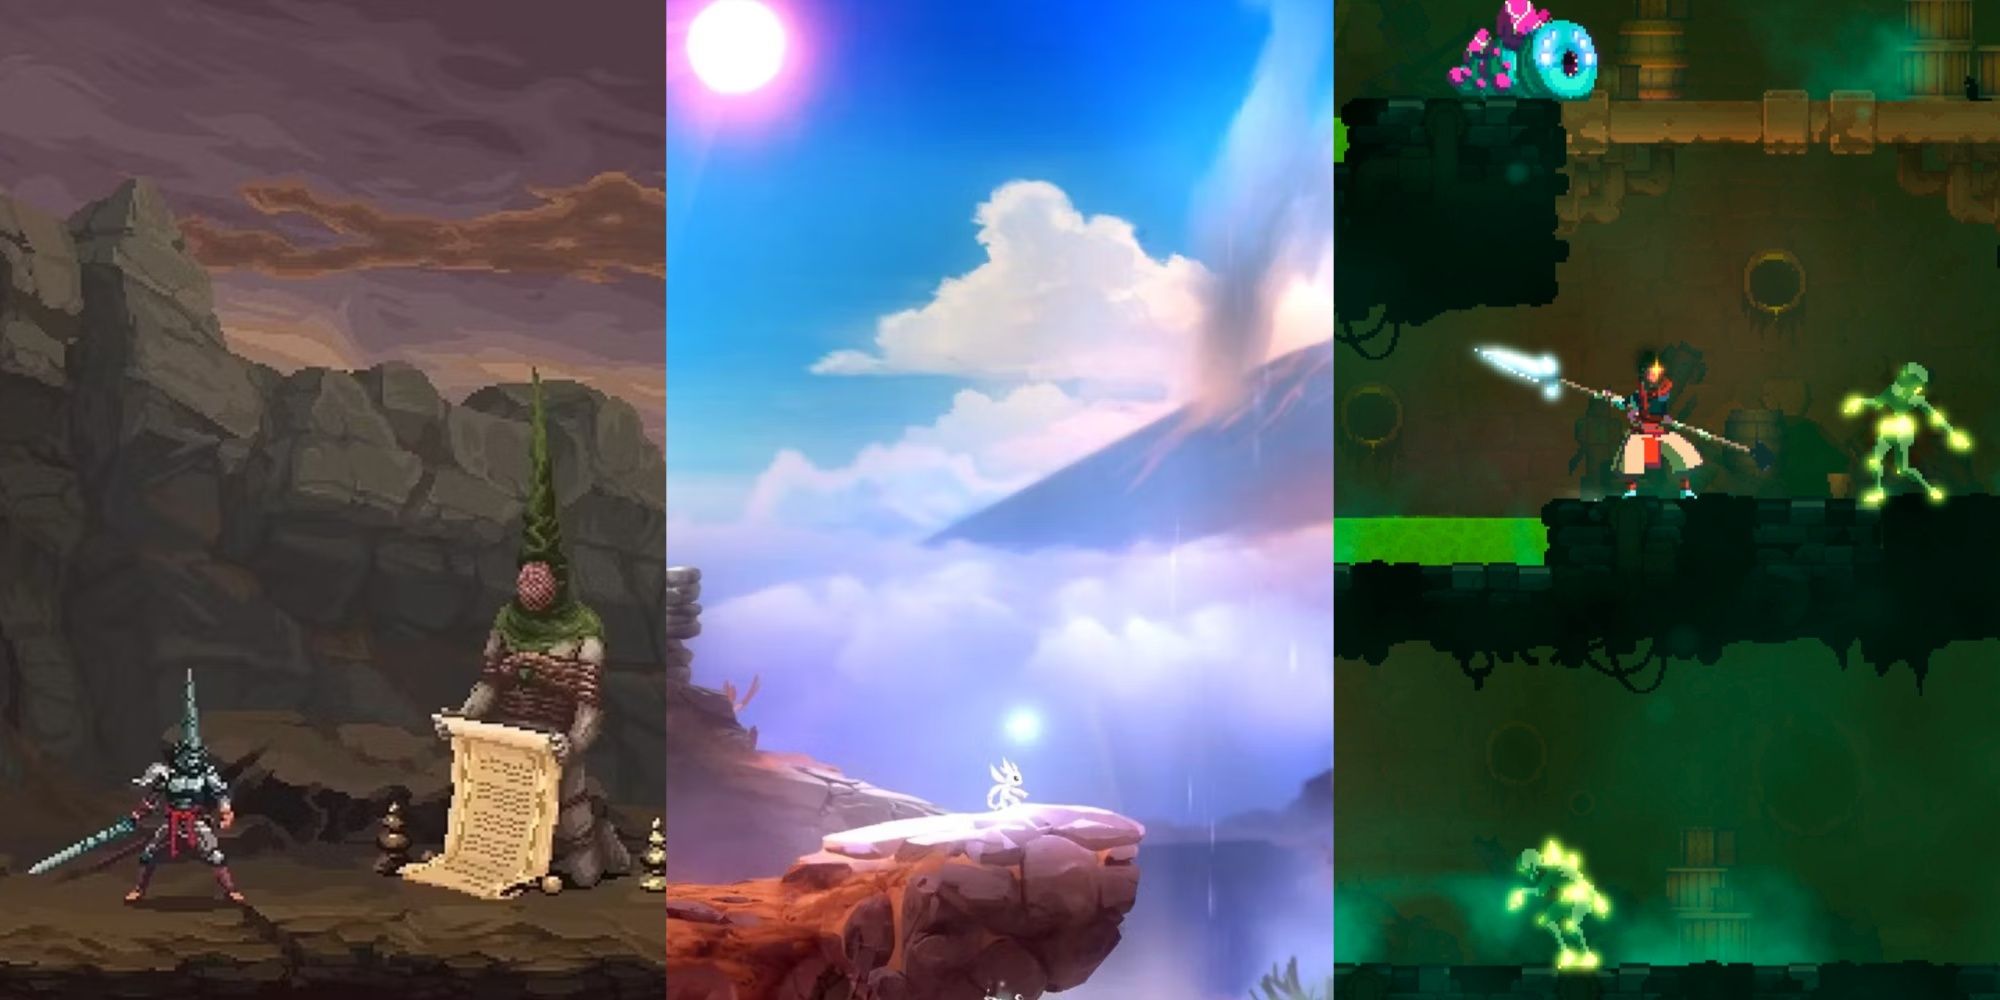 split image meeting a speaker blasphemous, wind valley ori and the blind forest, platforming and fighting enemies dead cells